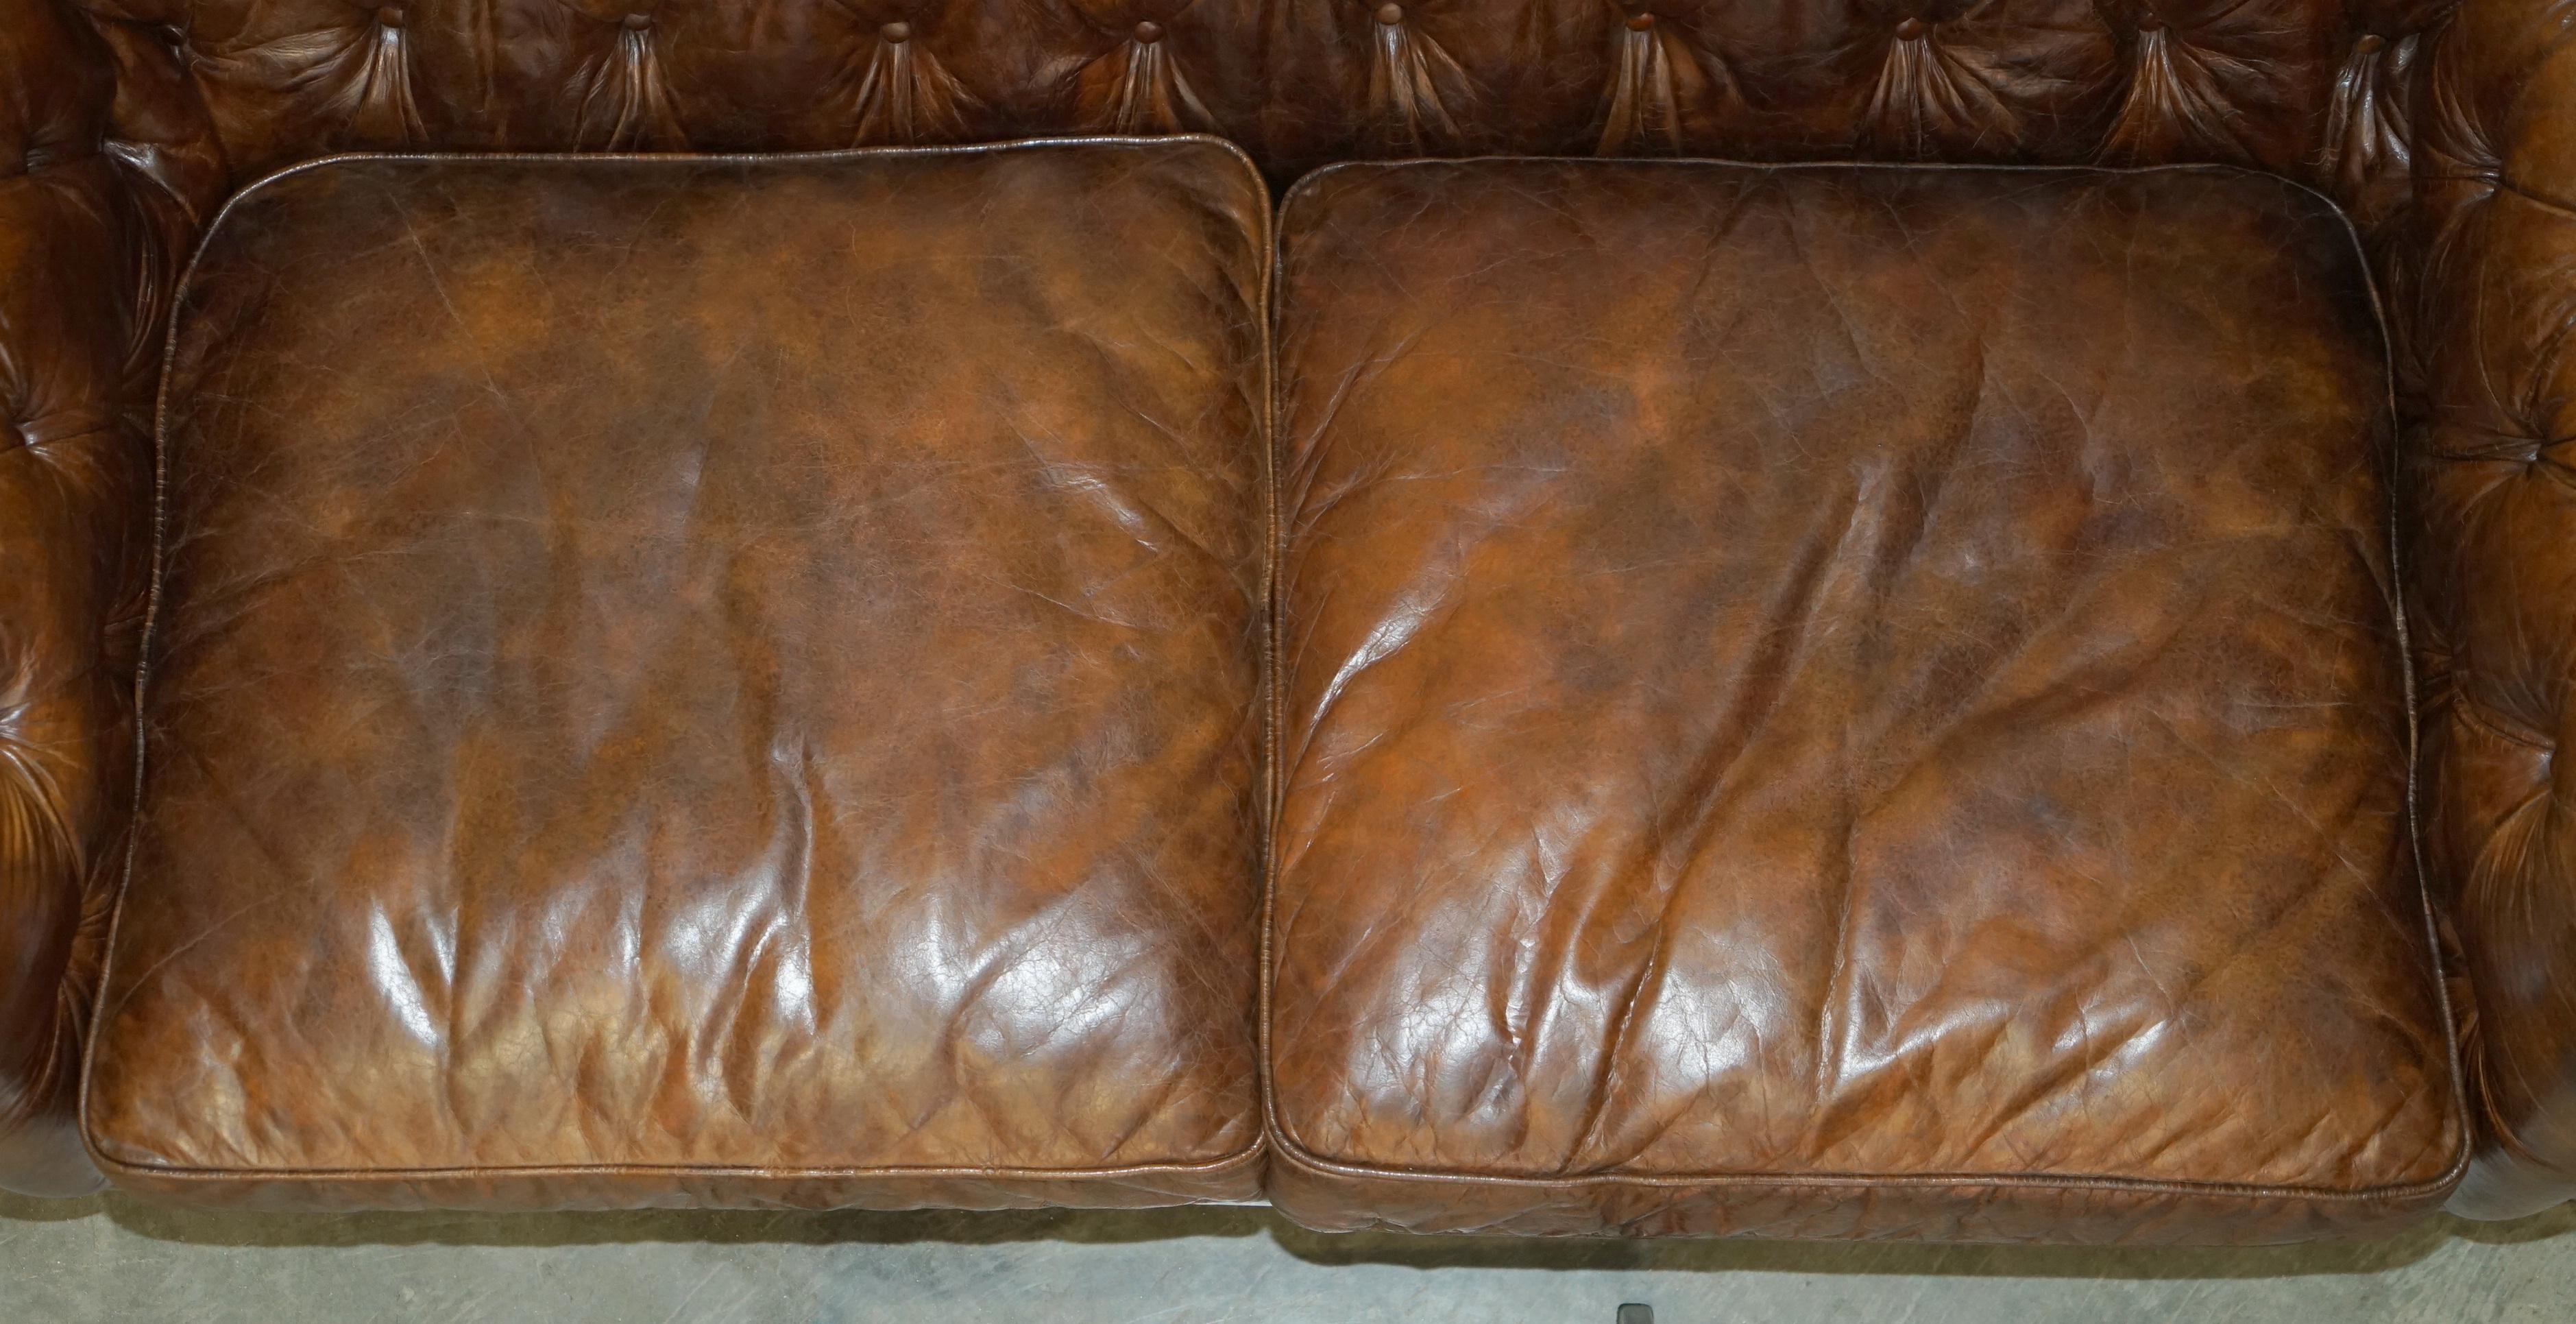 1 von 2 TIMOTHY OULTON HERiTAGE BROWN VINTAGE LEATHER CHESTERFIELD HALO SOFAS im Angebot 24